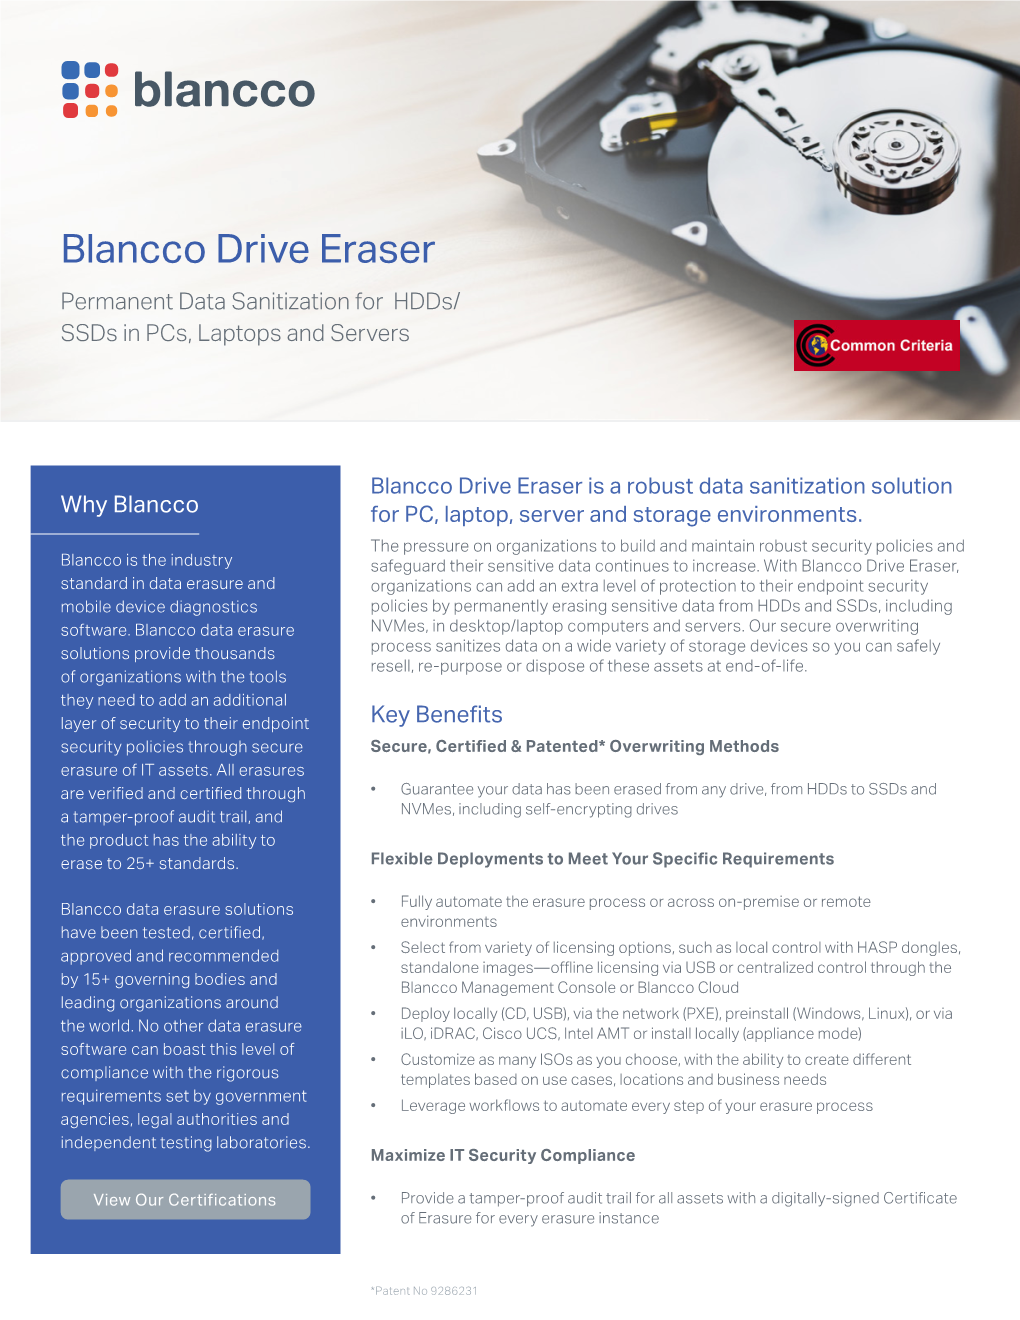 Blancco Drive Eraser Permanent Data Sanitization for Hdds/ Ssds in Pcs, Laptops and Servers